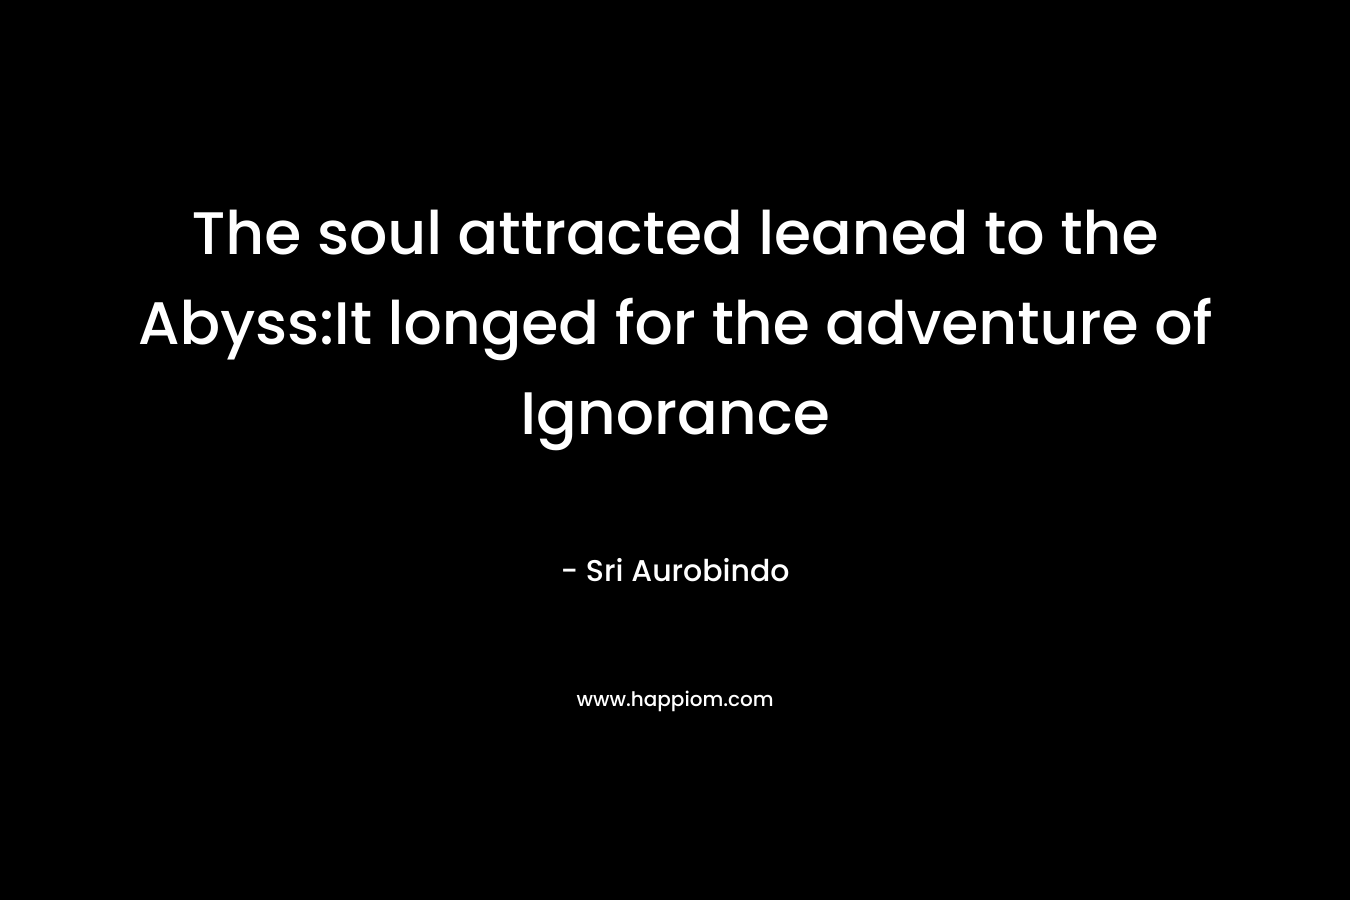 The soul attracted leaned to the Abyss:It longed for the adventure of Ignorance